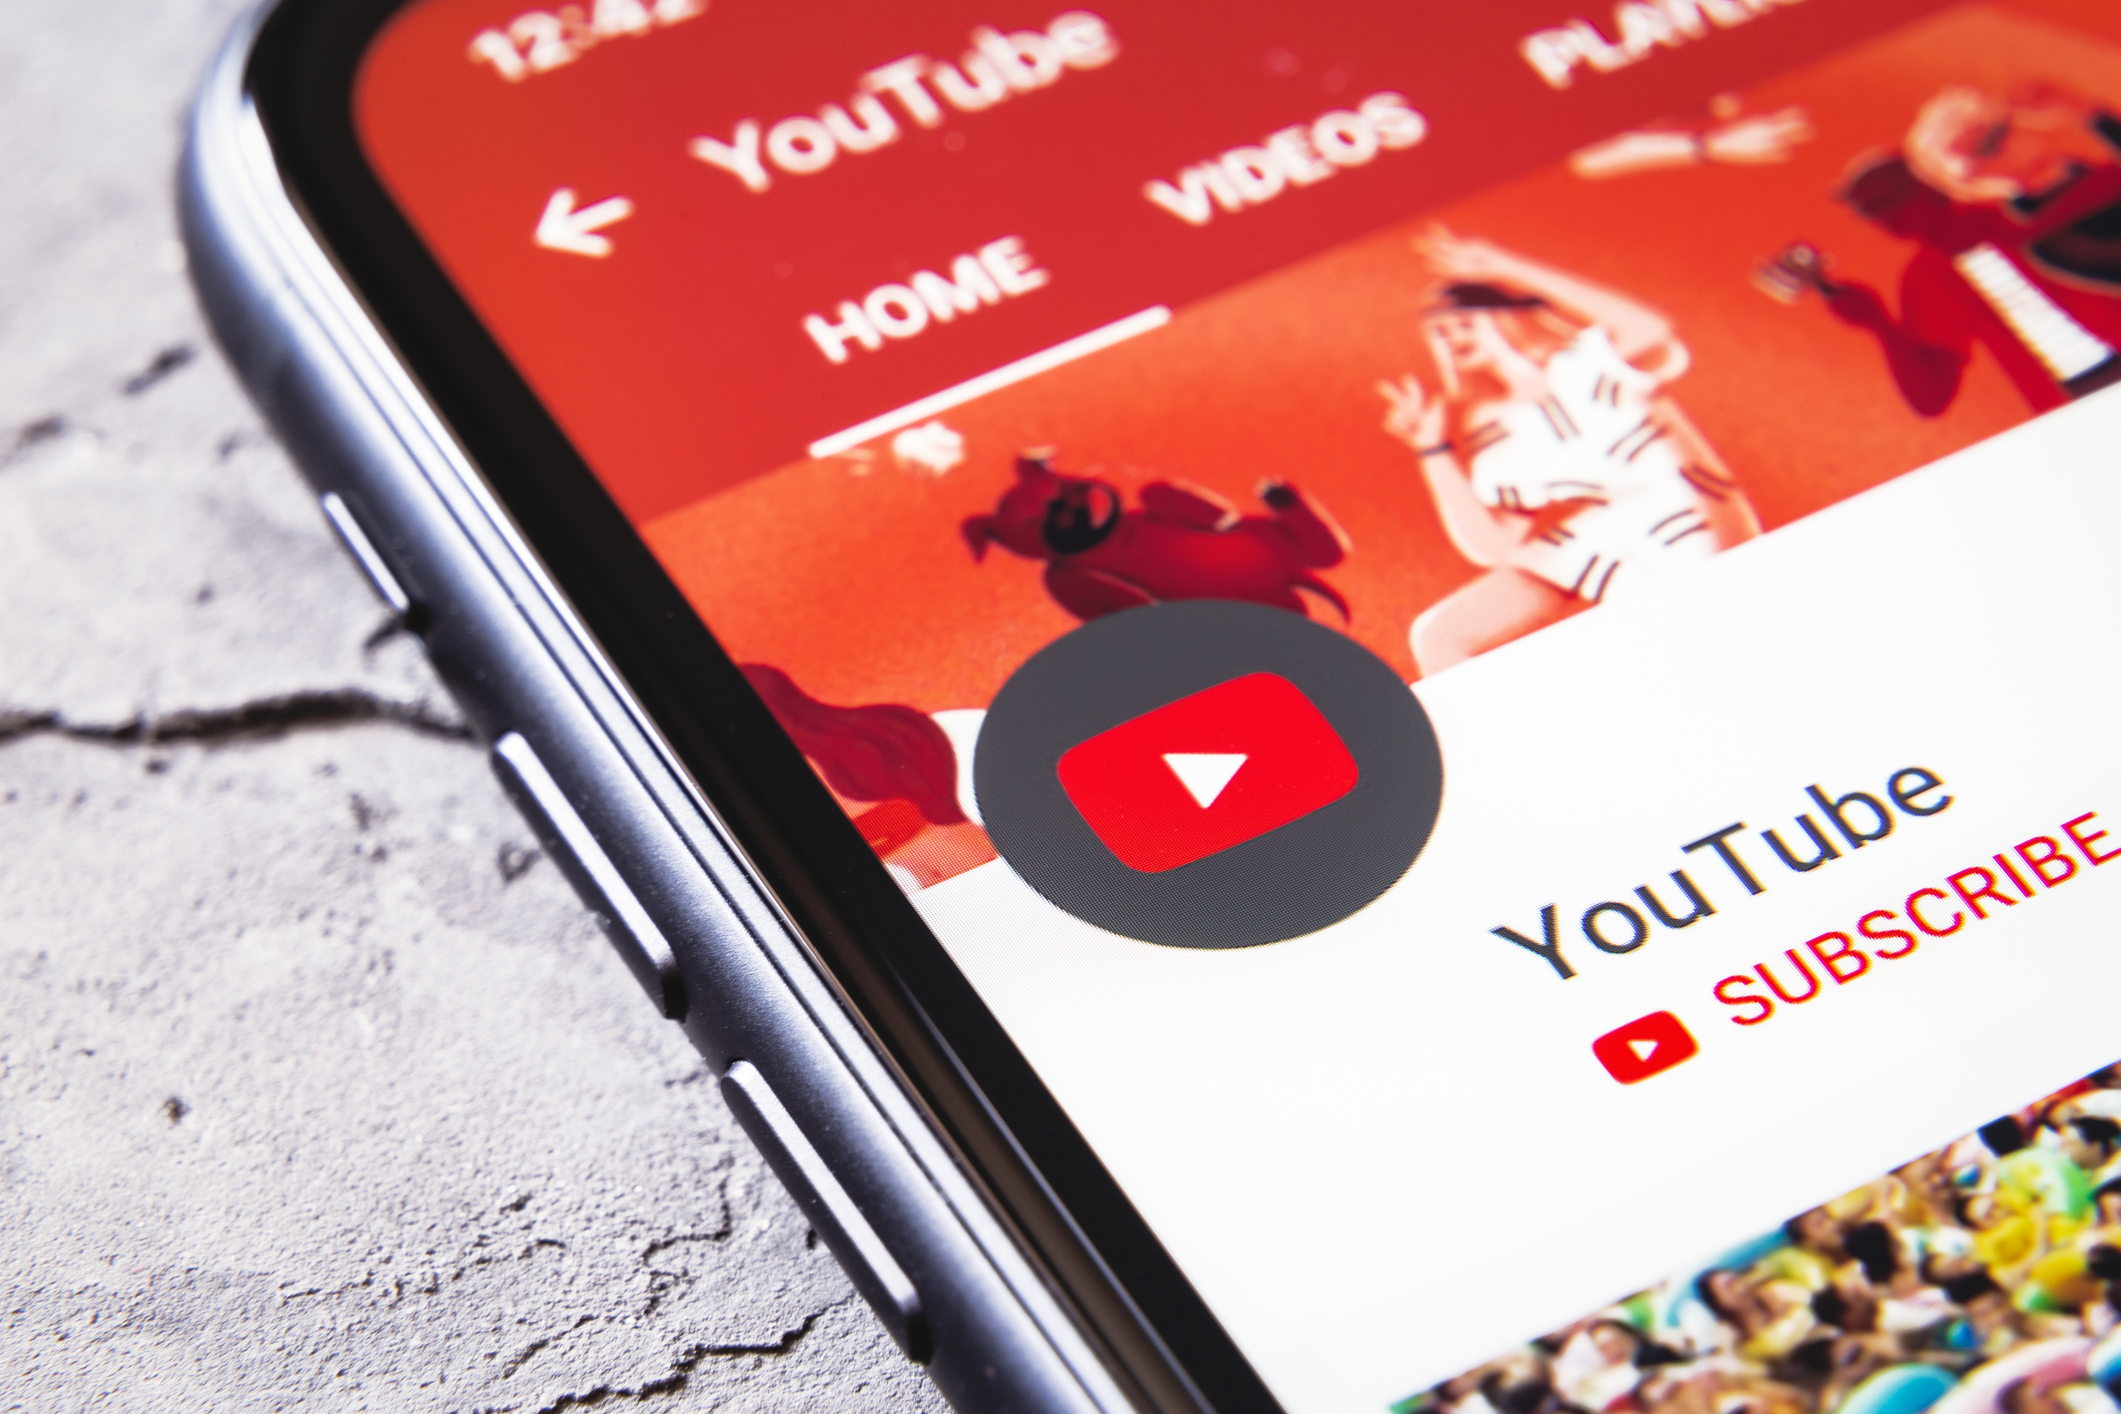 Learn how to get your videos noticed with these killer Youtube marketing tips.